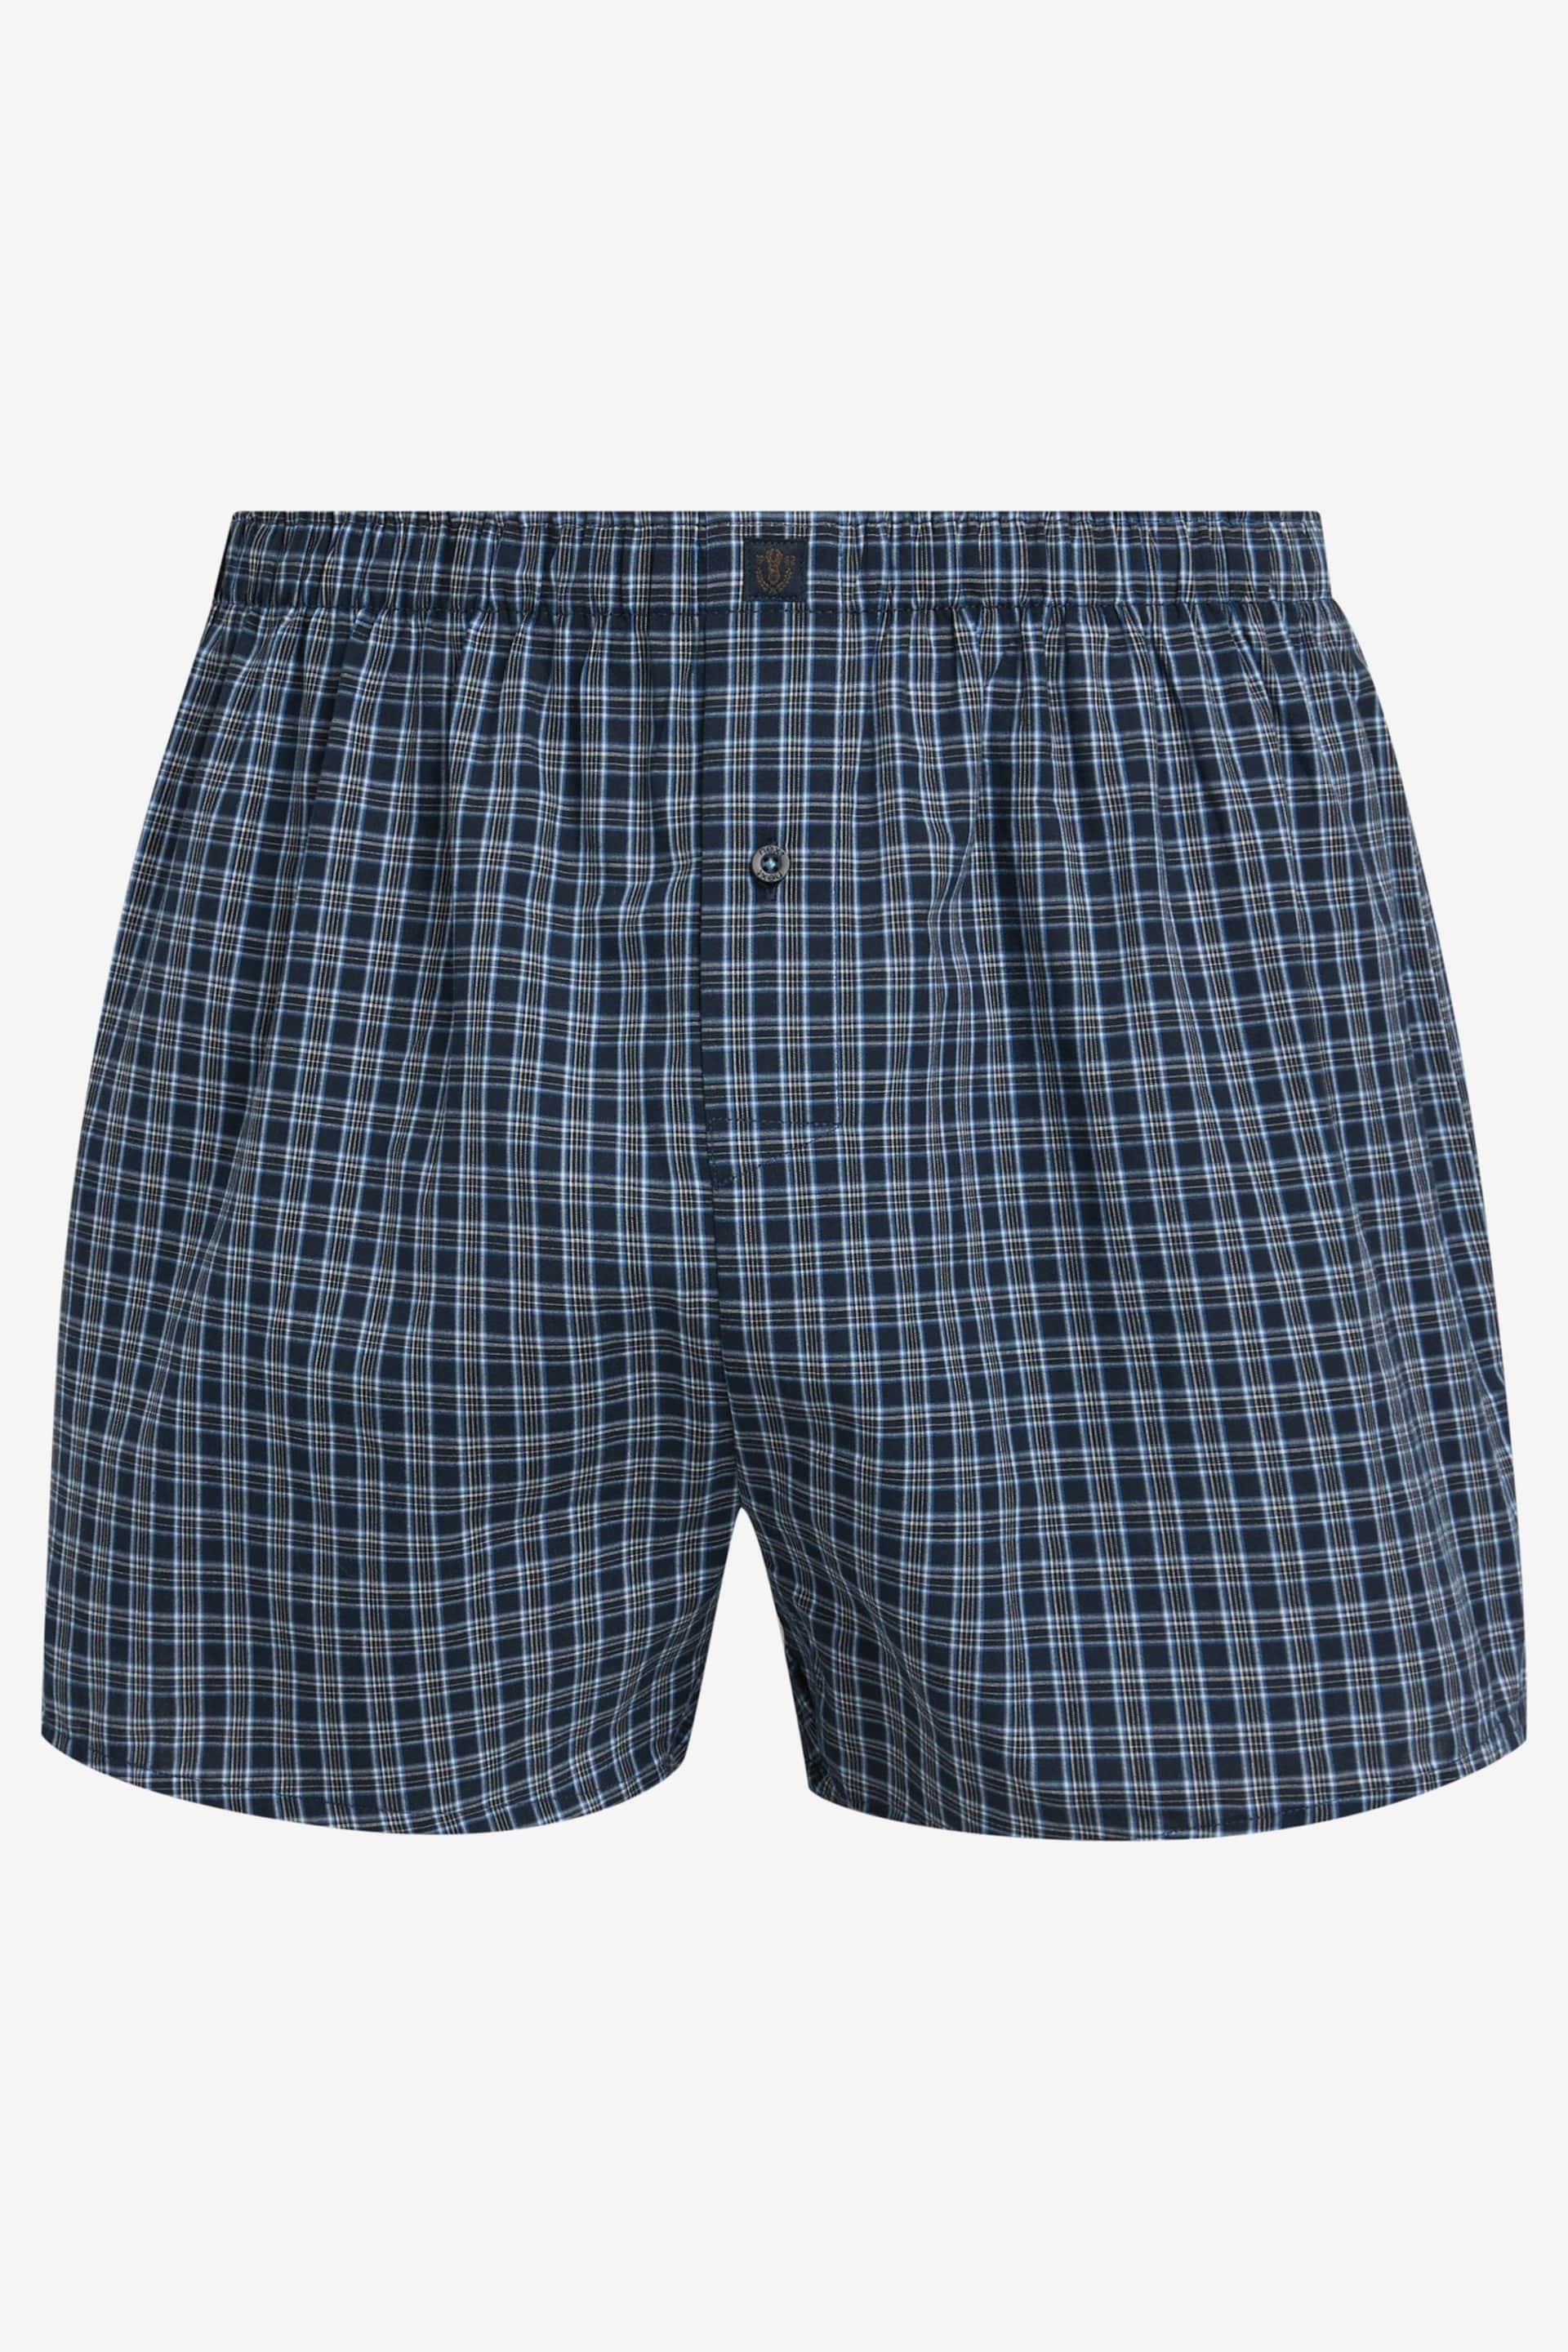 Navy 8 pack Woven Pure Cotton Boxers - Image 3 of 7